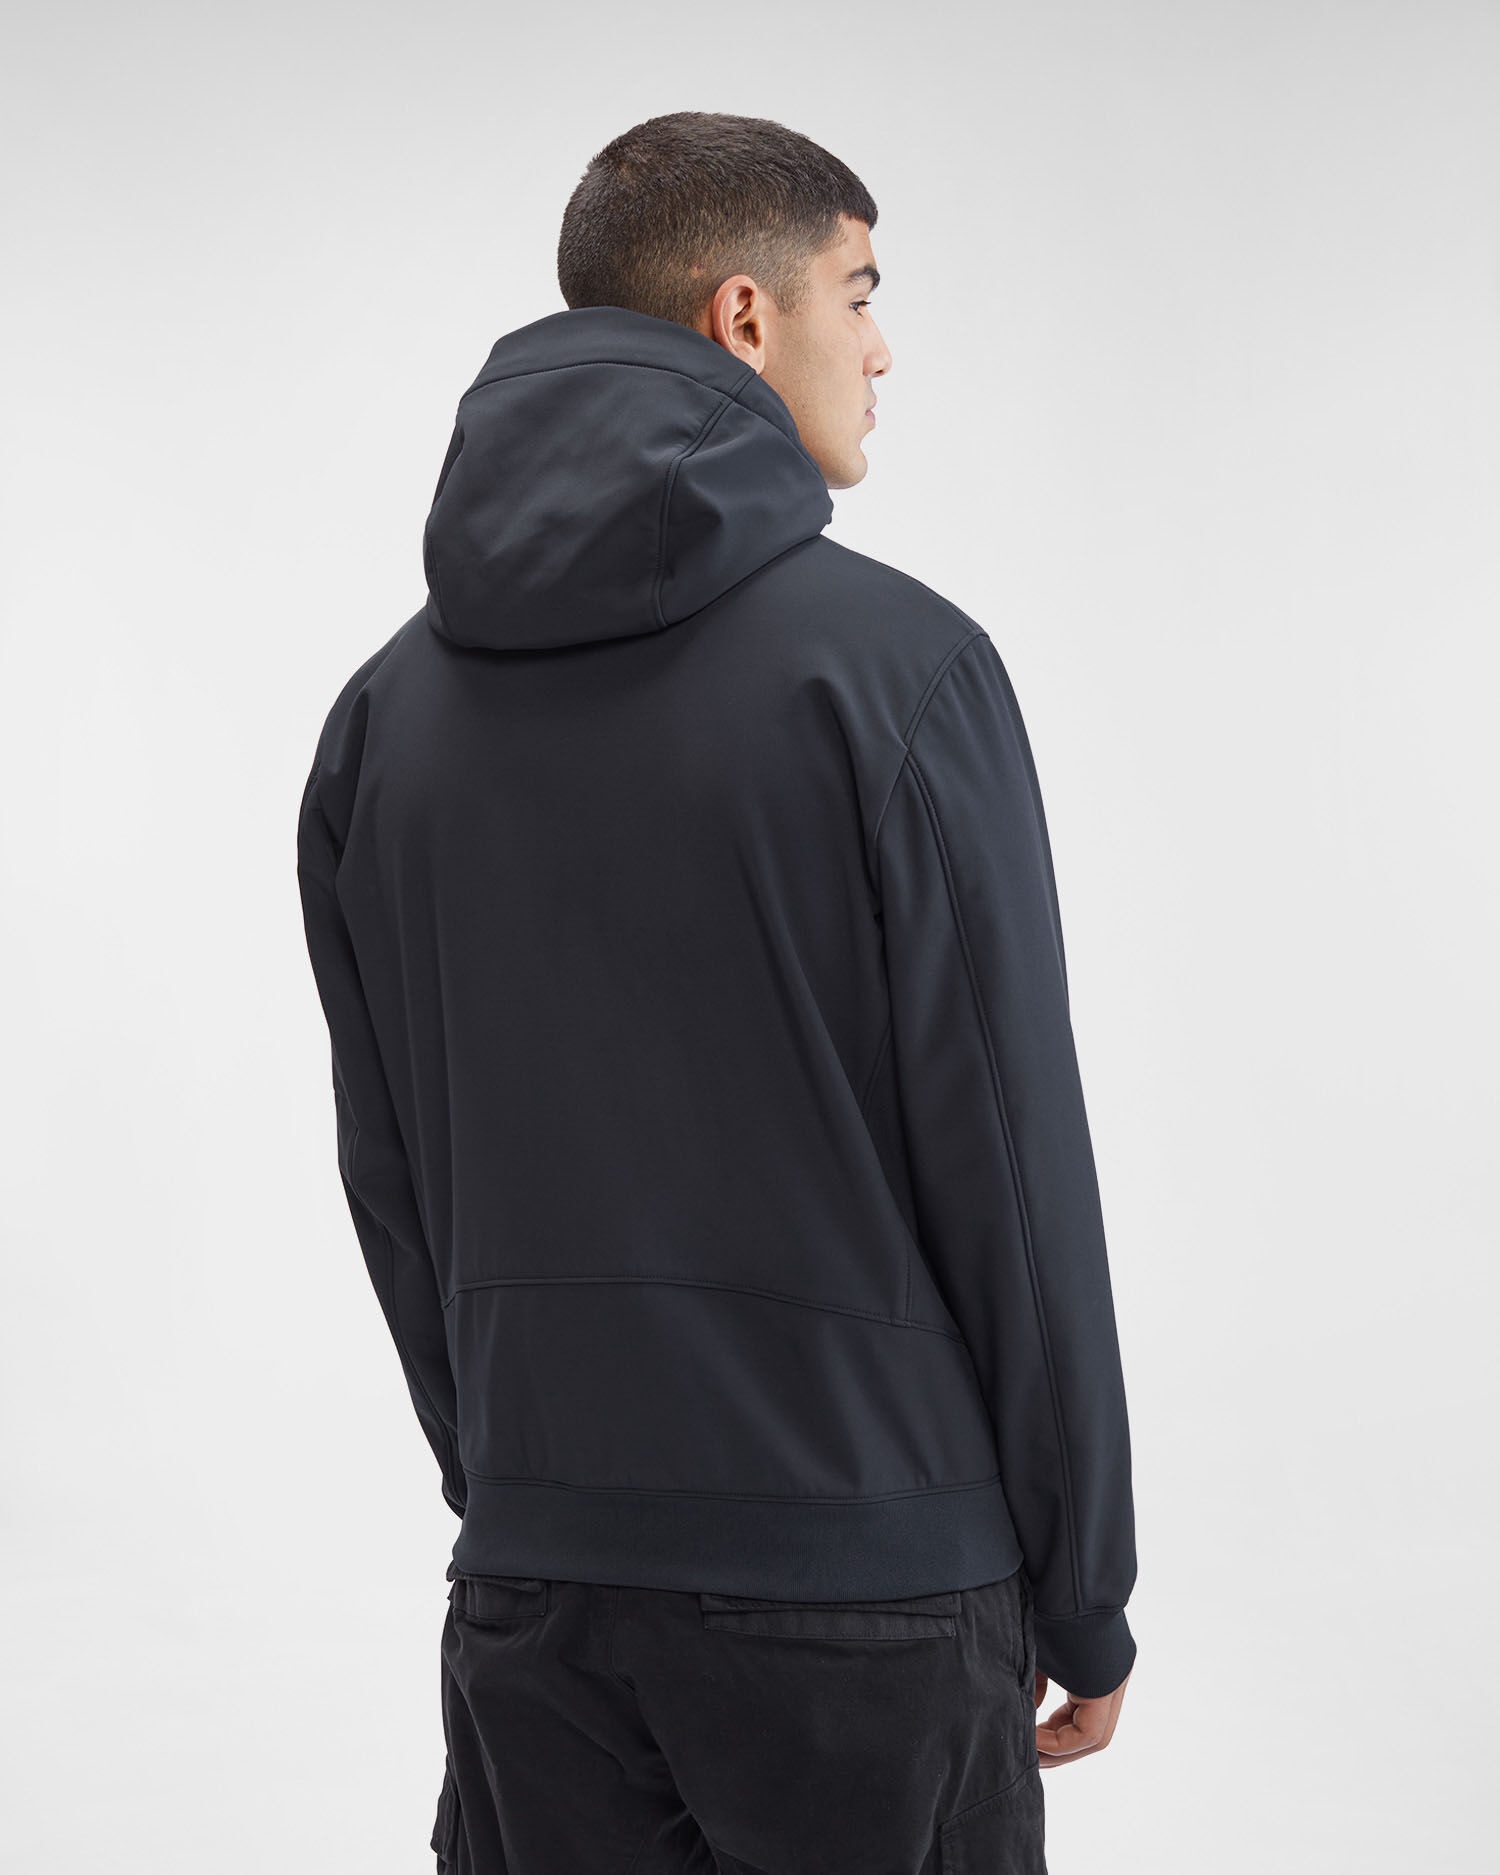 C.P. Shell-R Hooded Jacket - 3